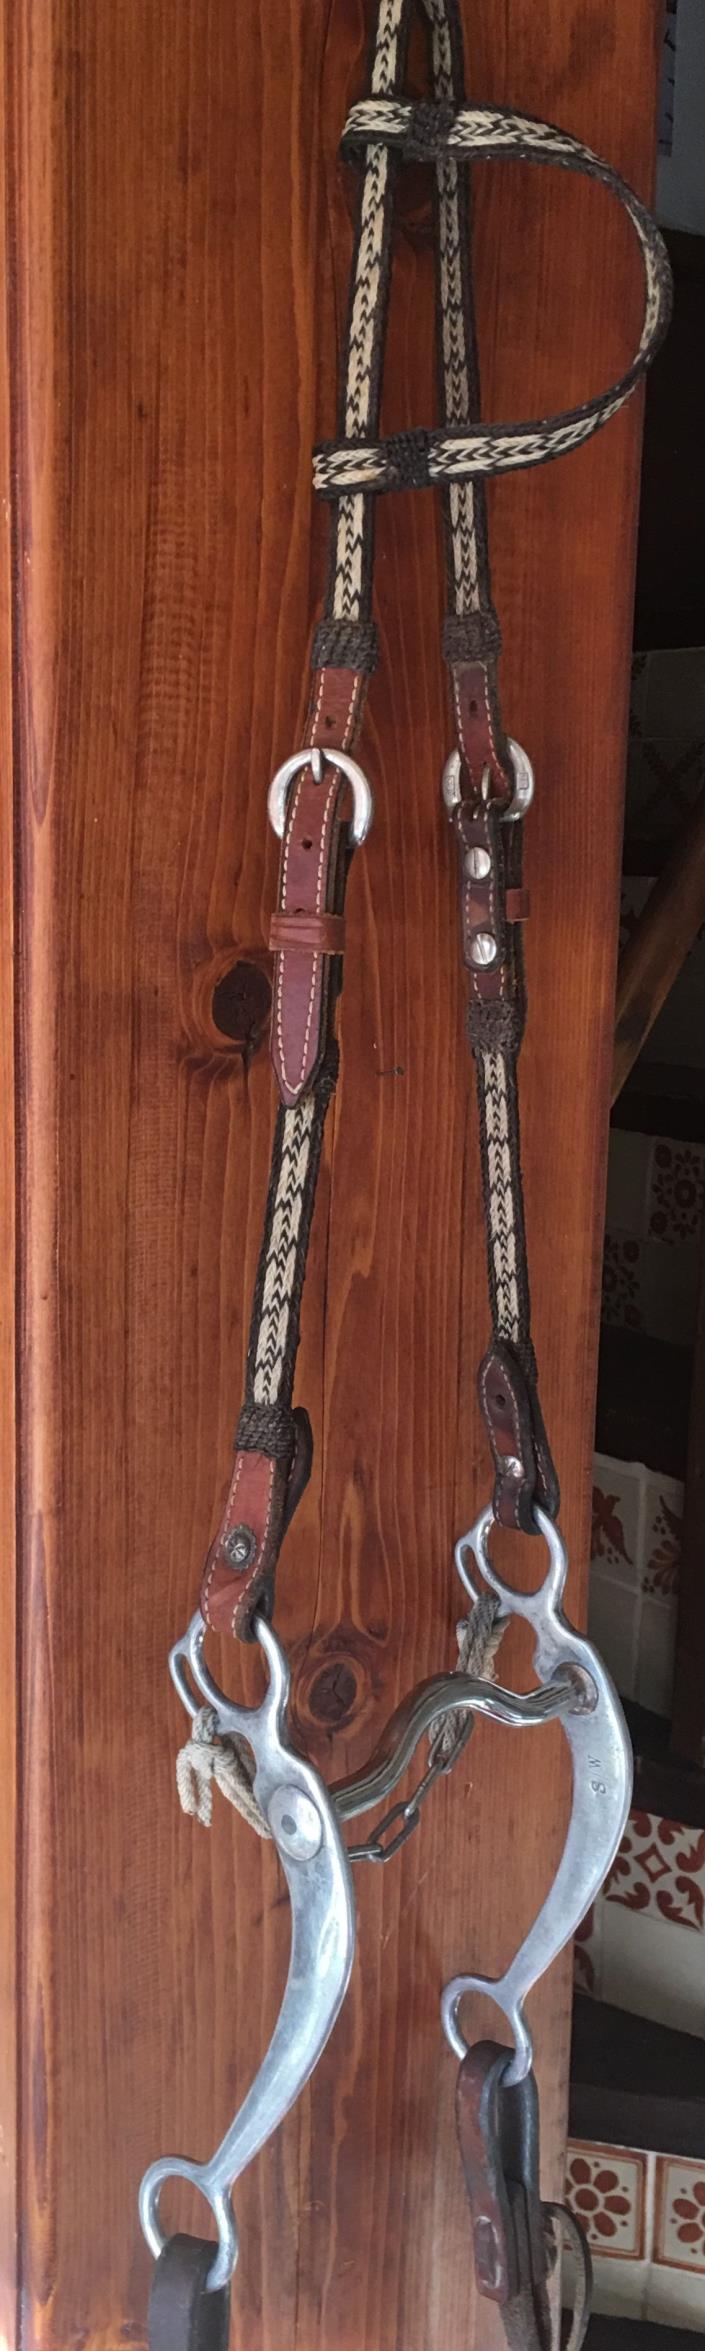 Horsehair leather bridle with BusterWelch bit and split reins